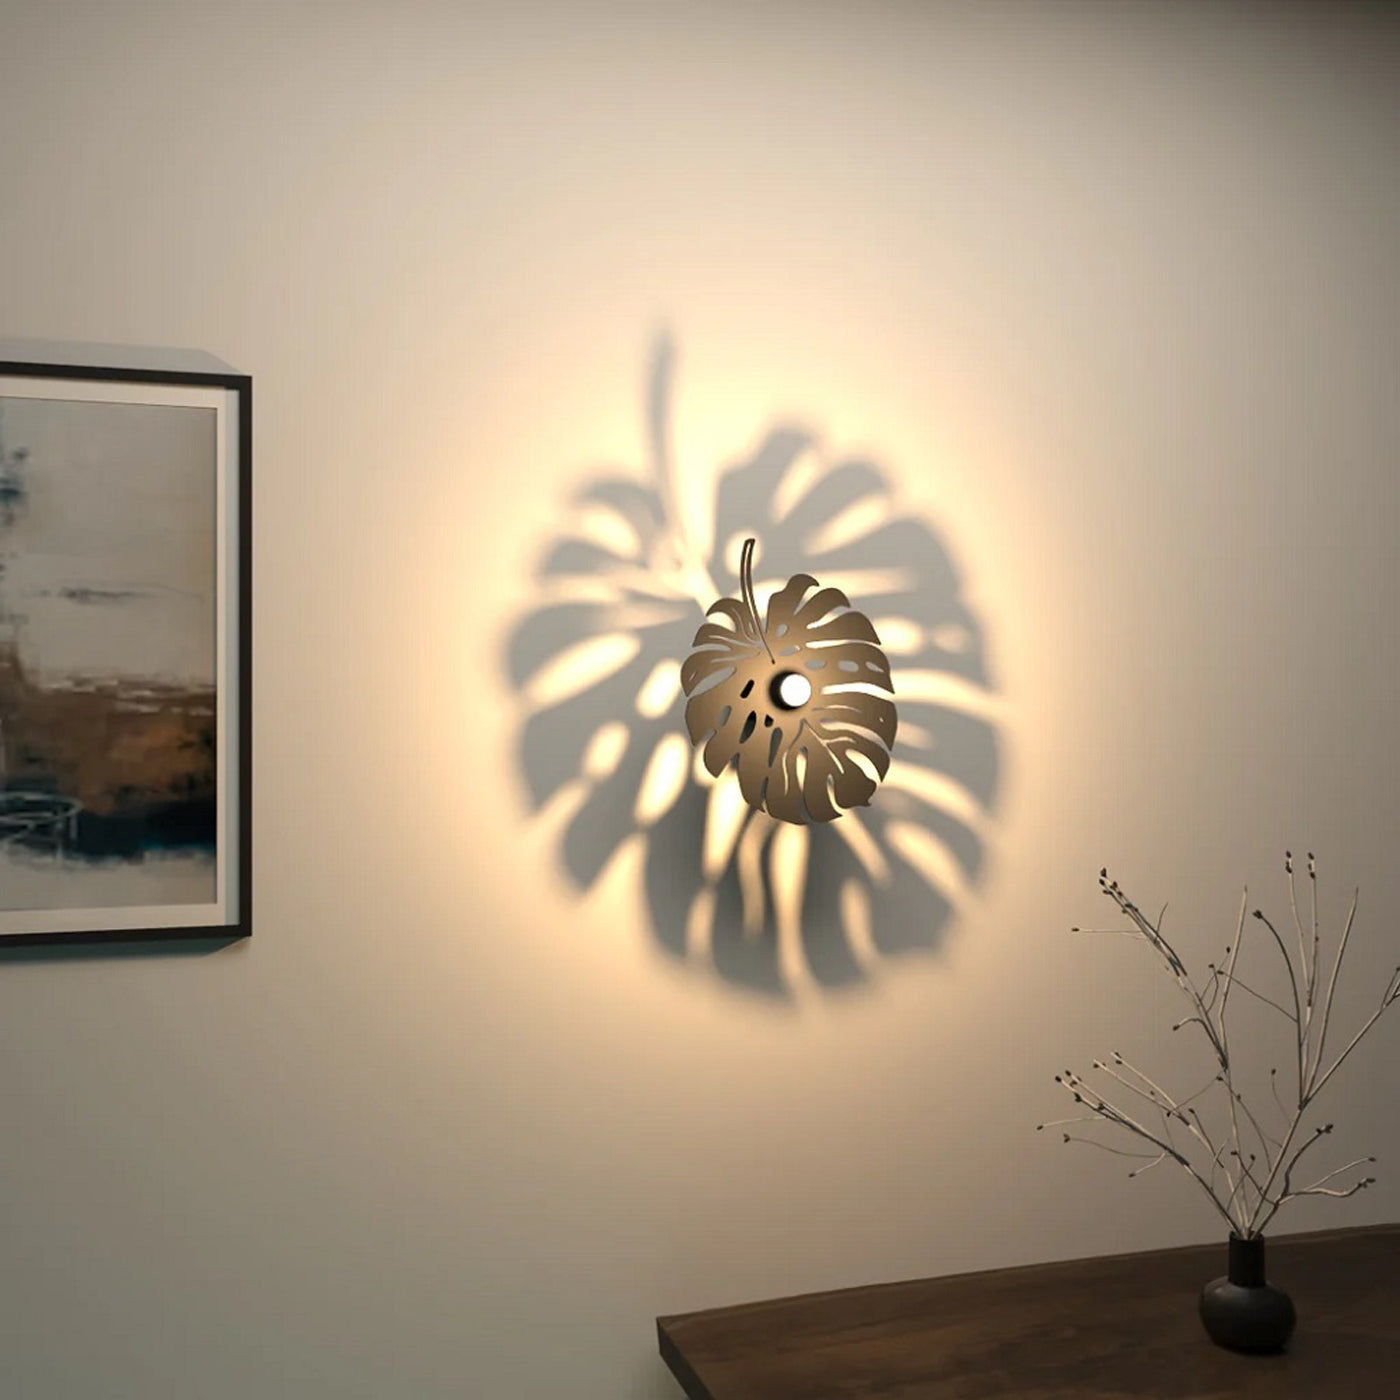 Tropical leaf design shadow lamp for Home / Office wall decor